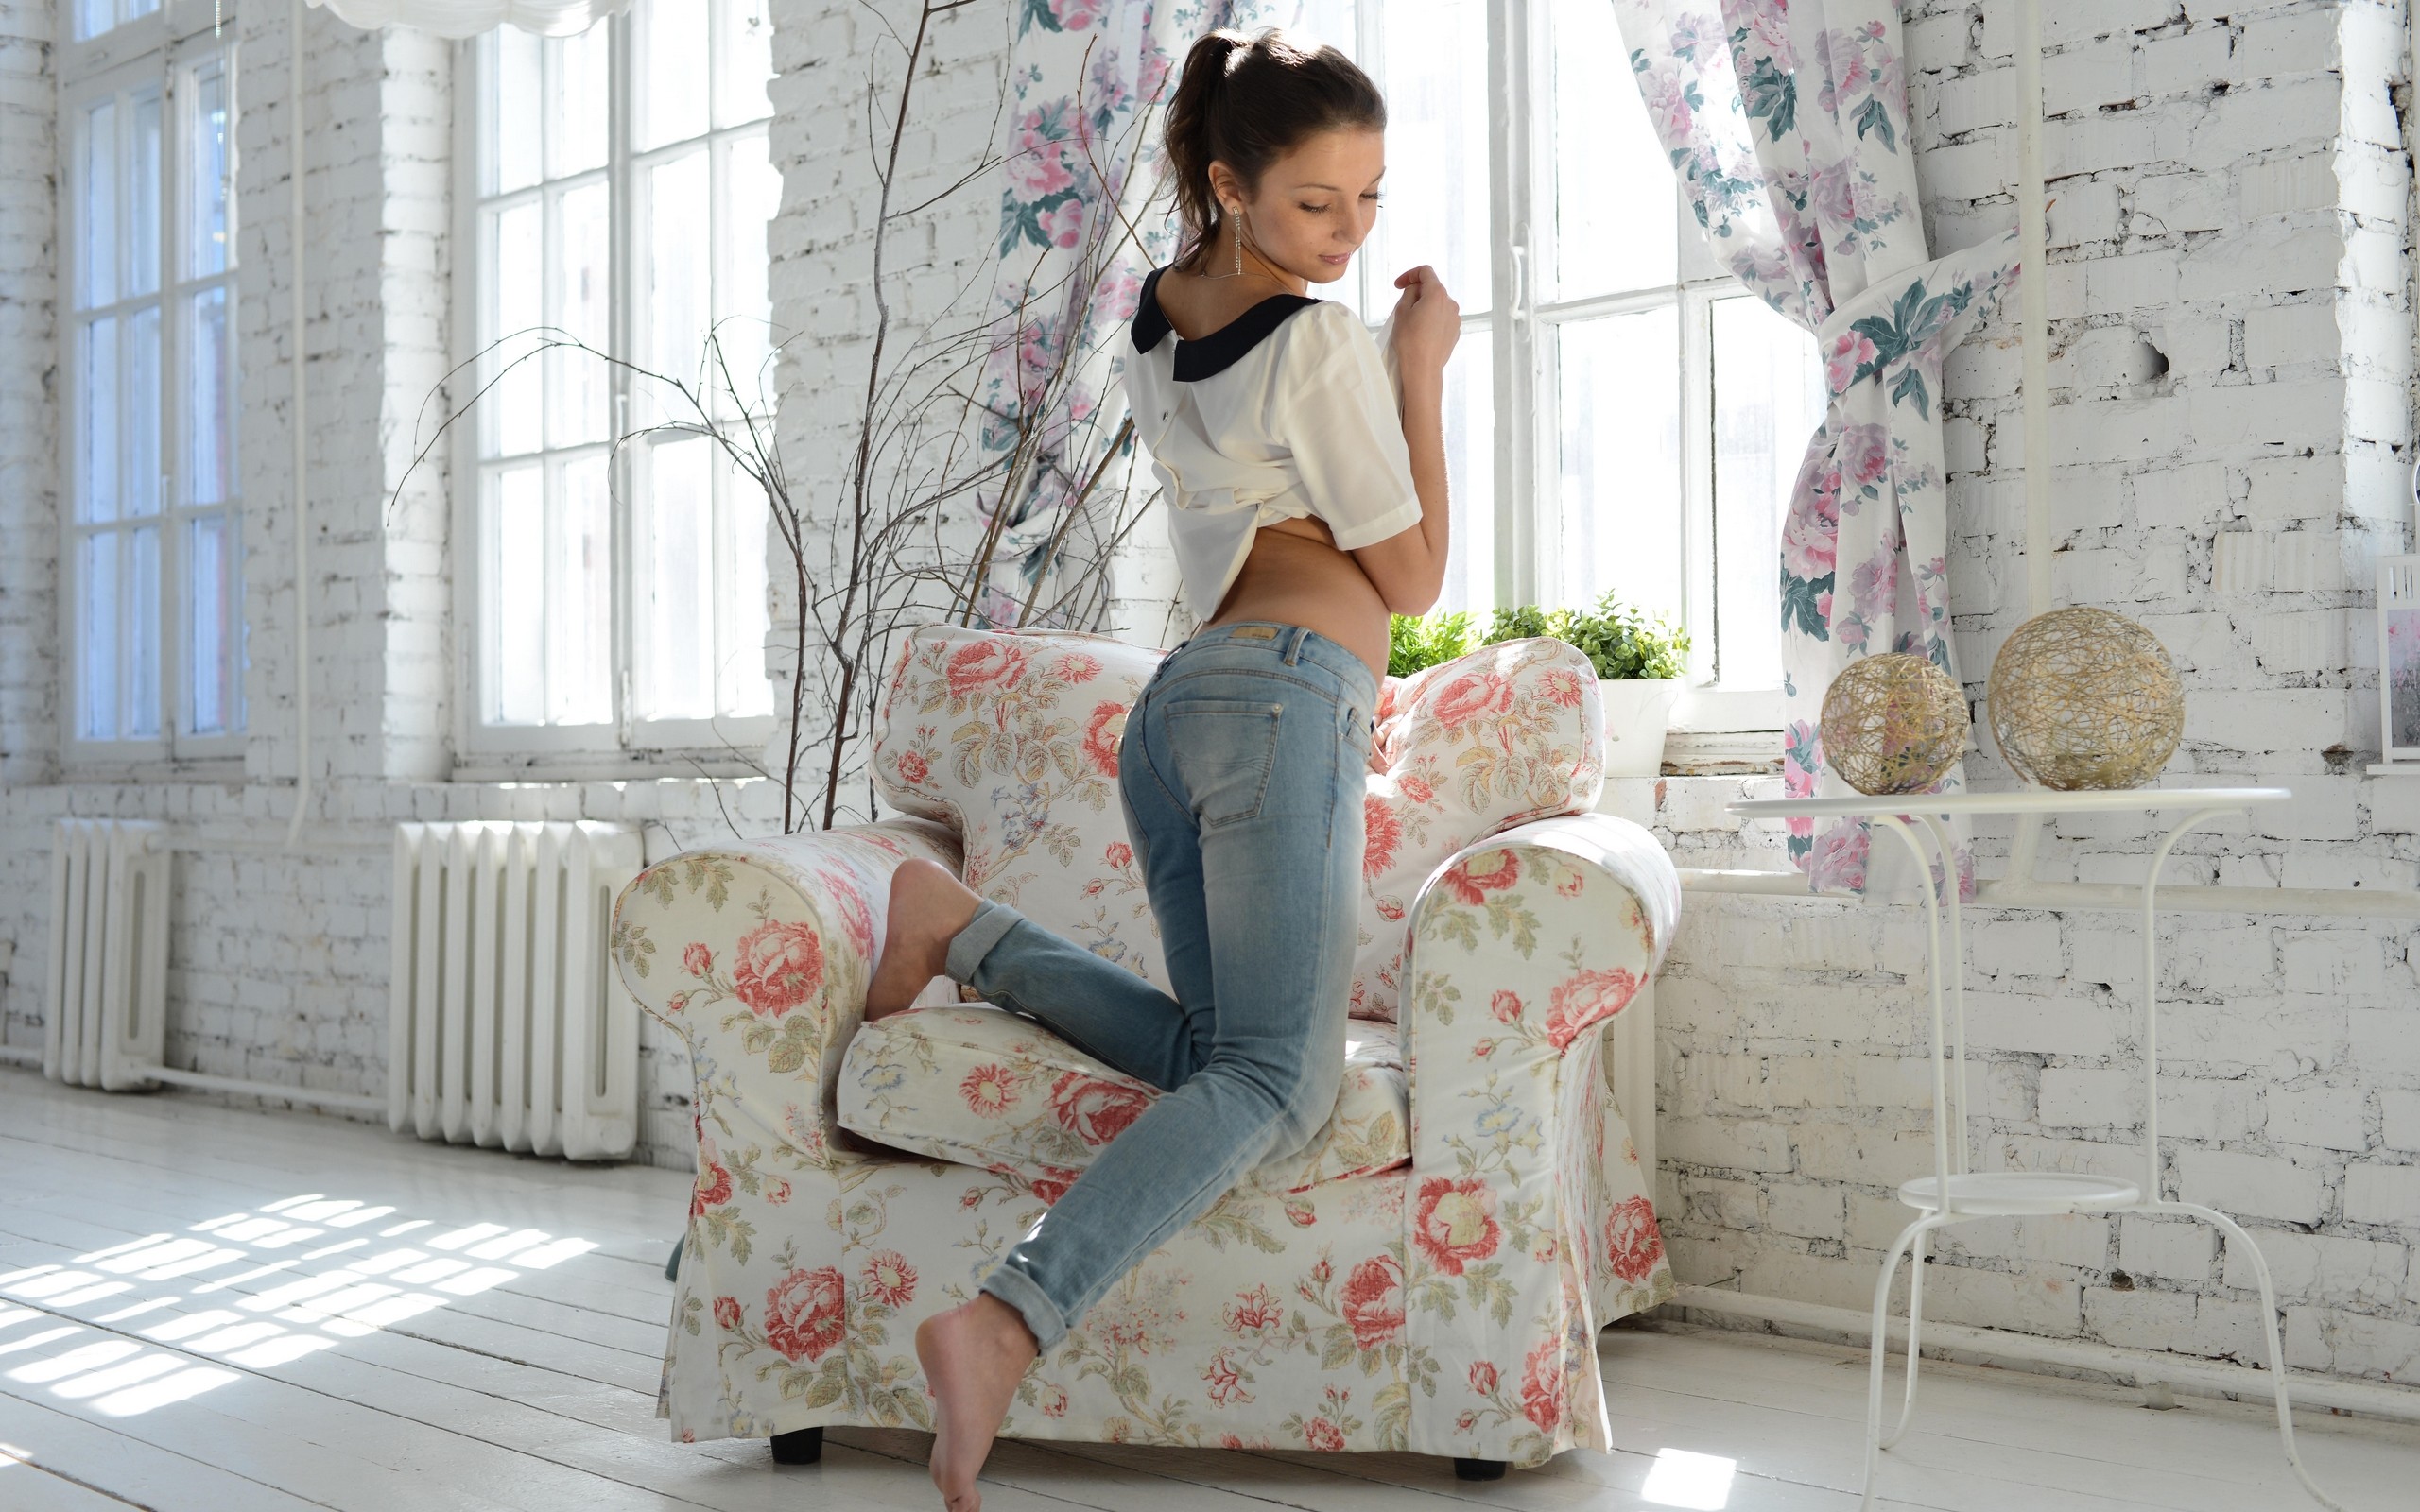 Brunette Ponytail Jeans Back Armchairs Women Chair Model Barefoot 2560x1600